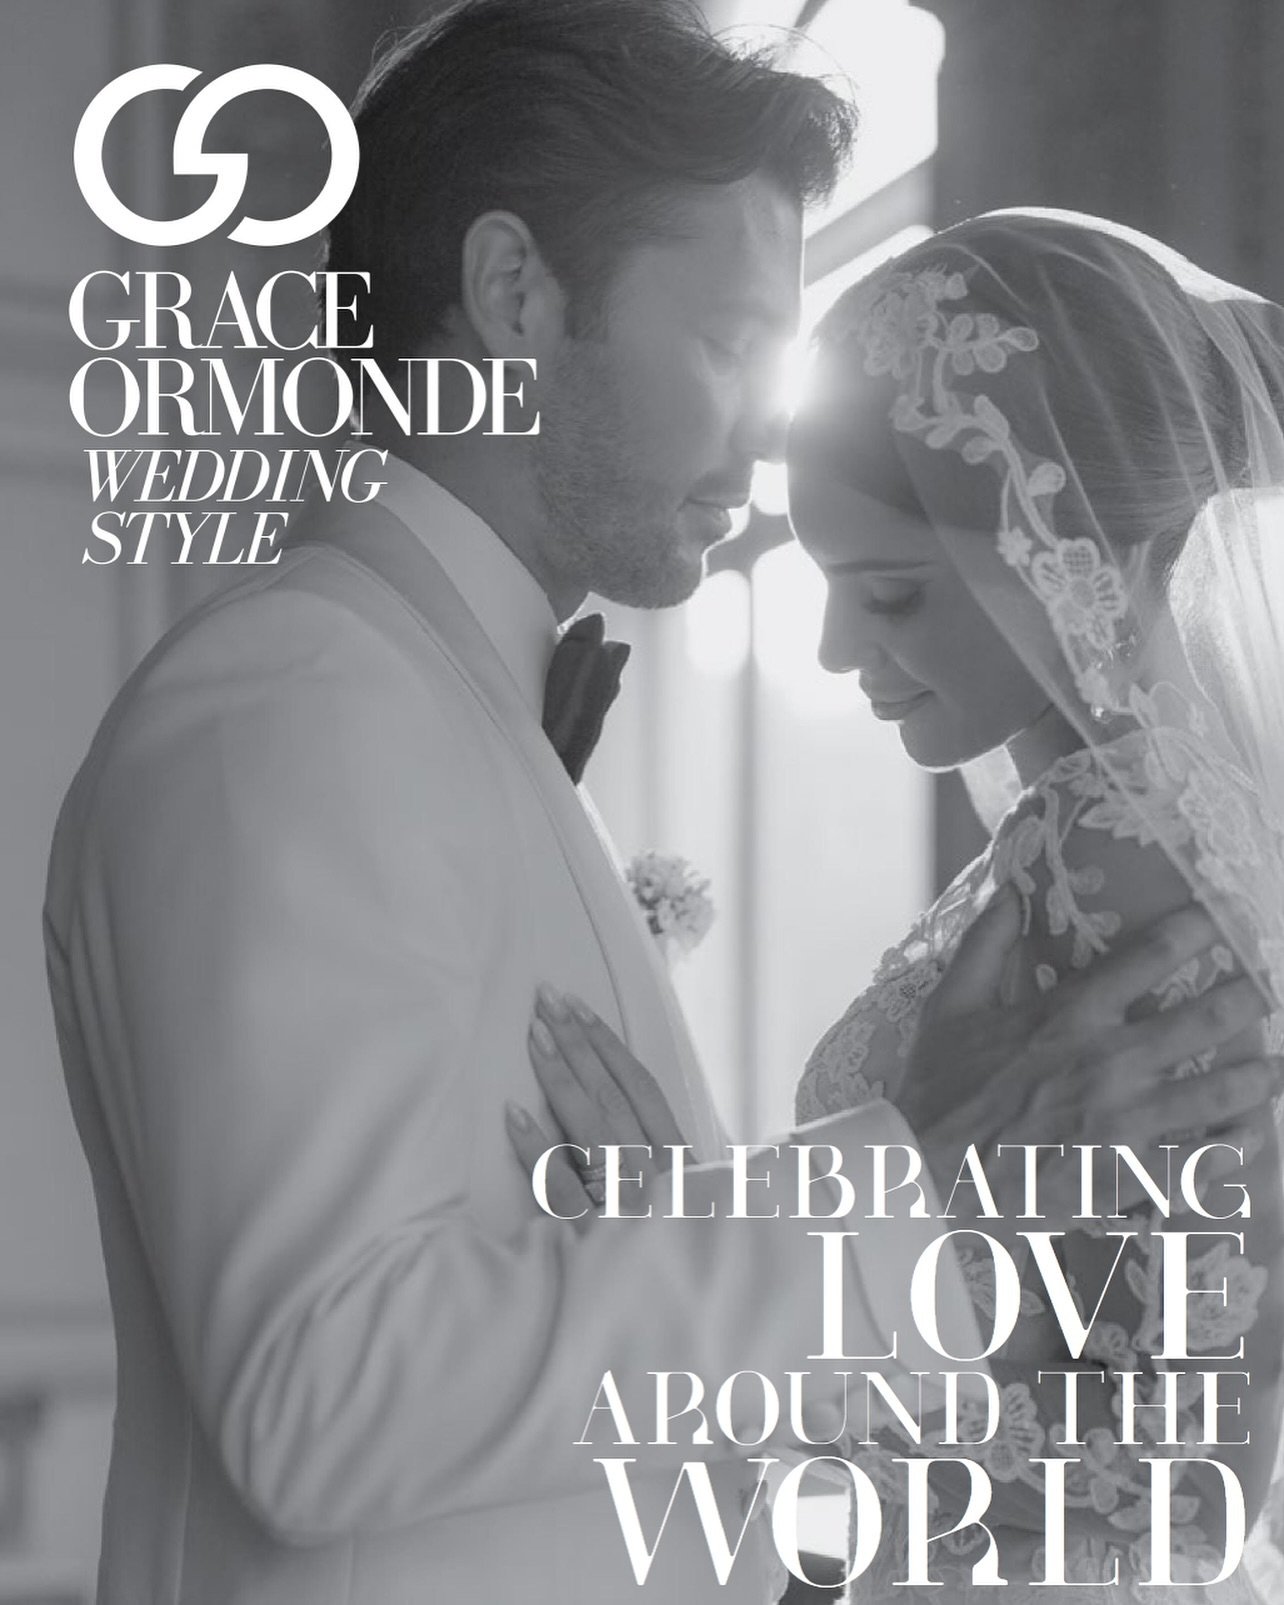 Sorry but this deserved her moment alone in the feed :)
Michelle and Alex&rsquo;s wedding on @wedding_style &lsquo;s cover.

Planning &amp; Design @italianweddingevent 
Photography @paocolleoni 
Video @matcastefilms 
Venue @villaaureliagianicolo 
Flo